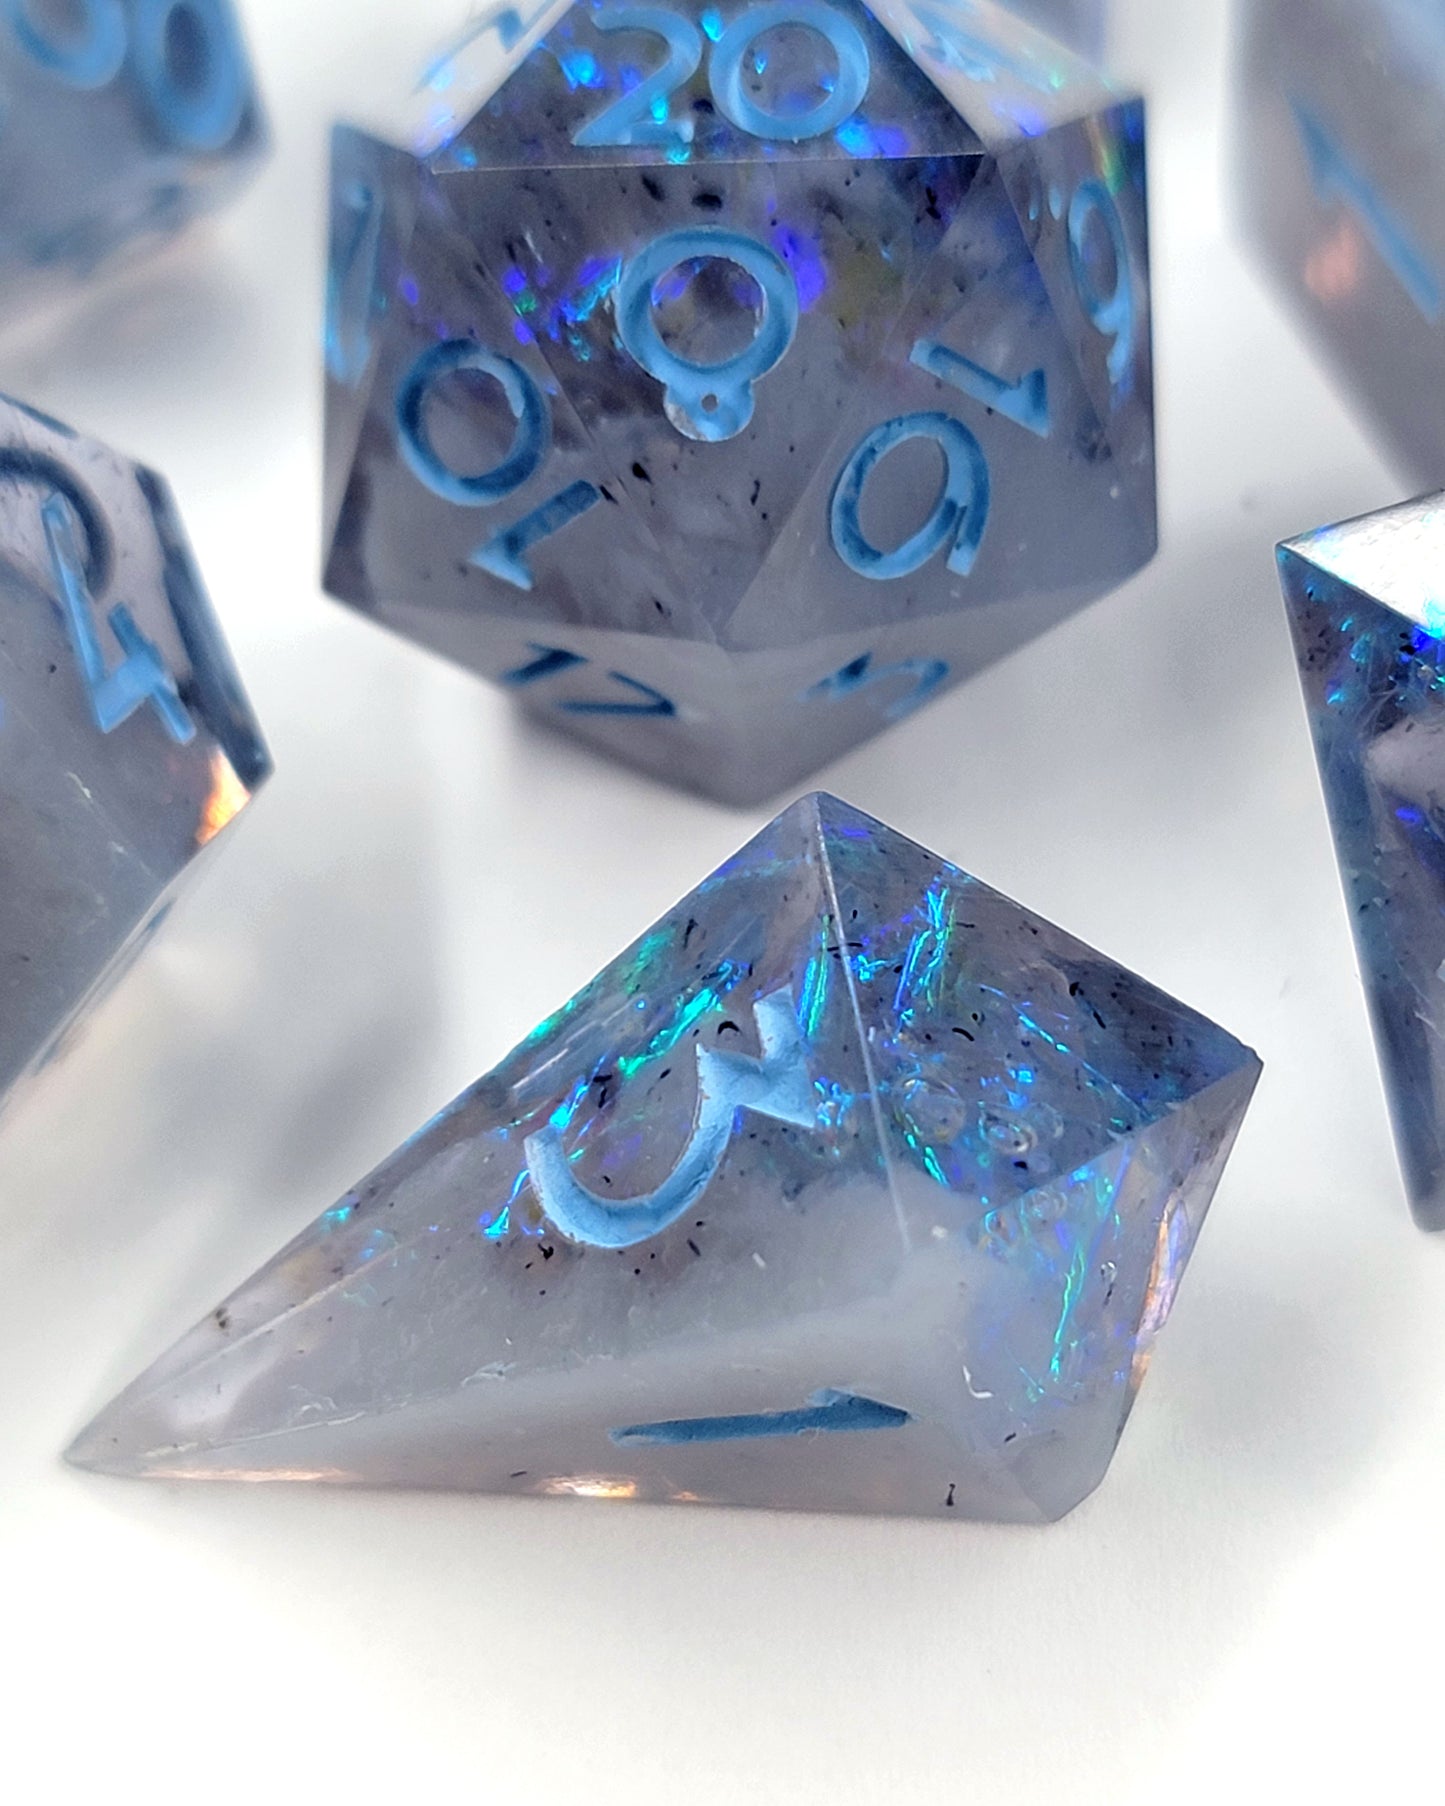 Lighting Storm - 7 Piece handmade D&D Dice| Hand Crafted Dungeons and Dragons Dice